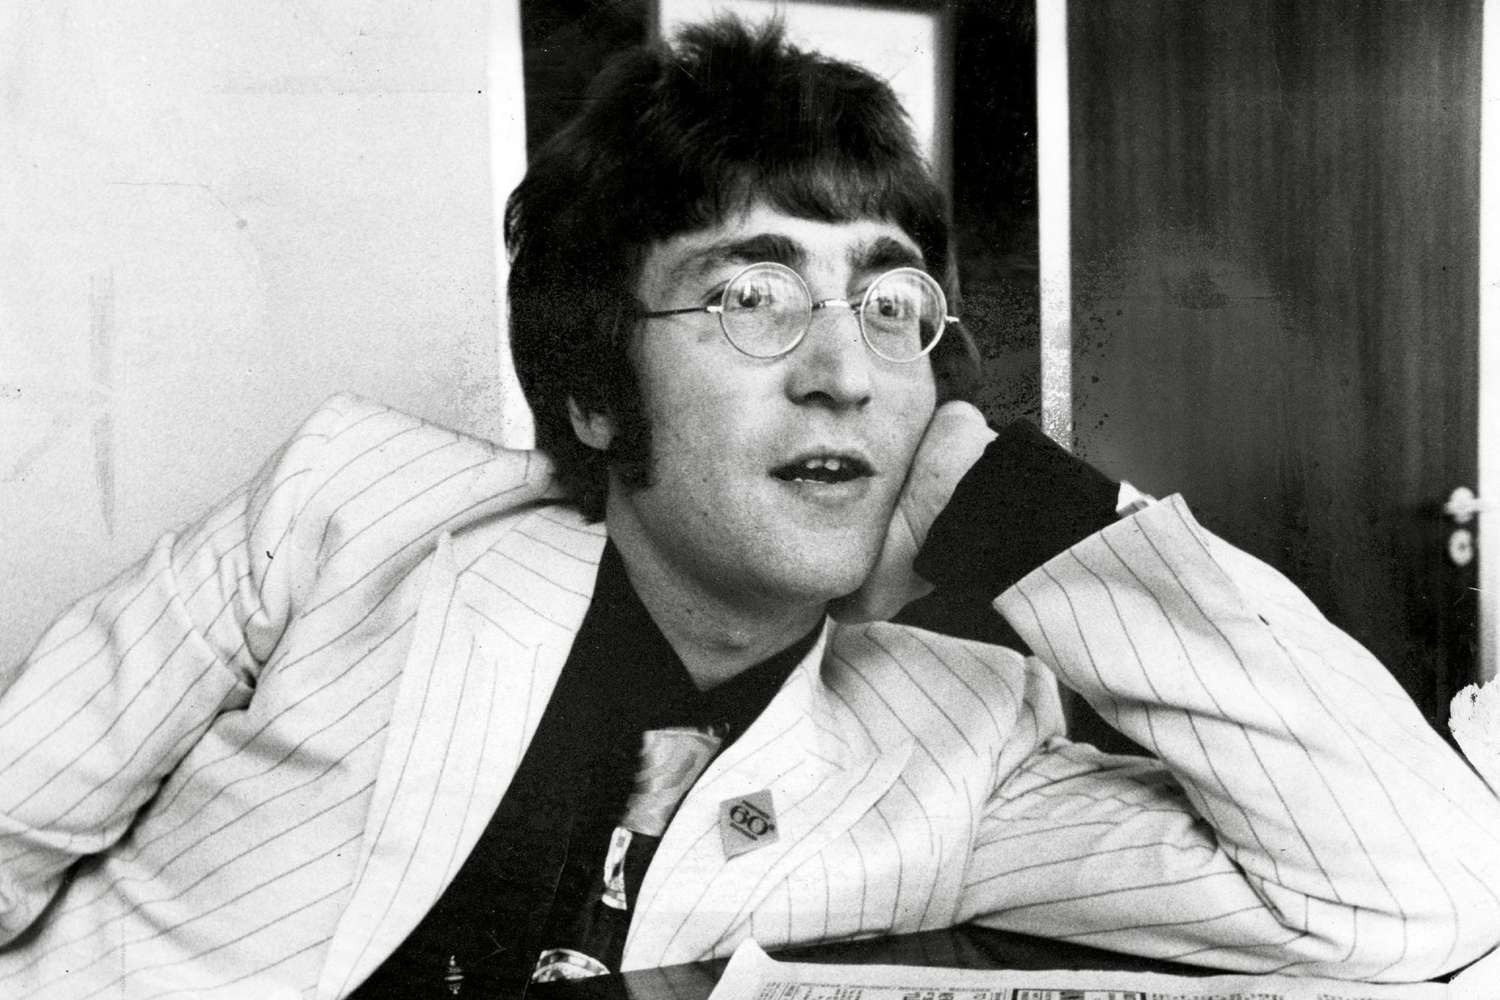 John Lennon Honored by His Sons, Bandmates 40 Years After Death | PEOPLE.com